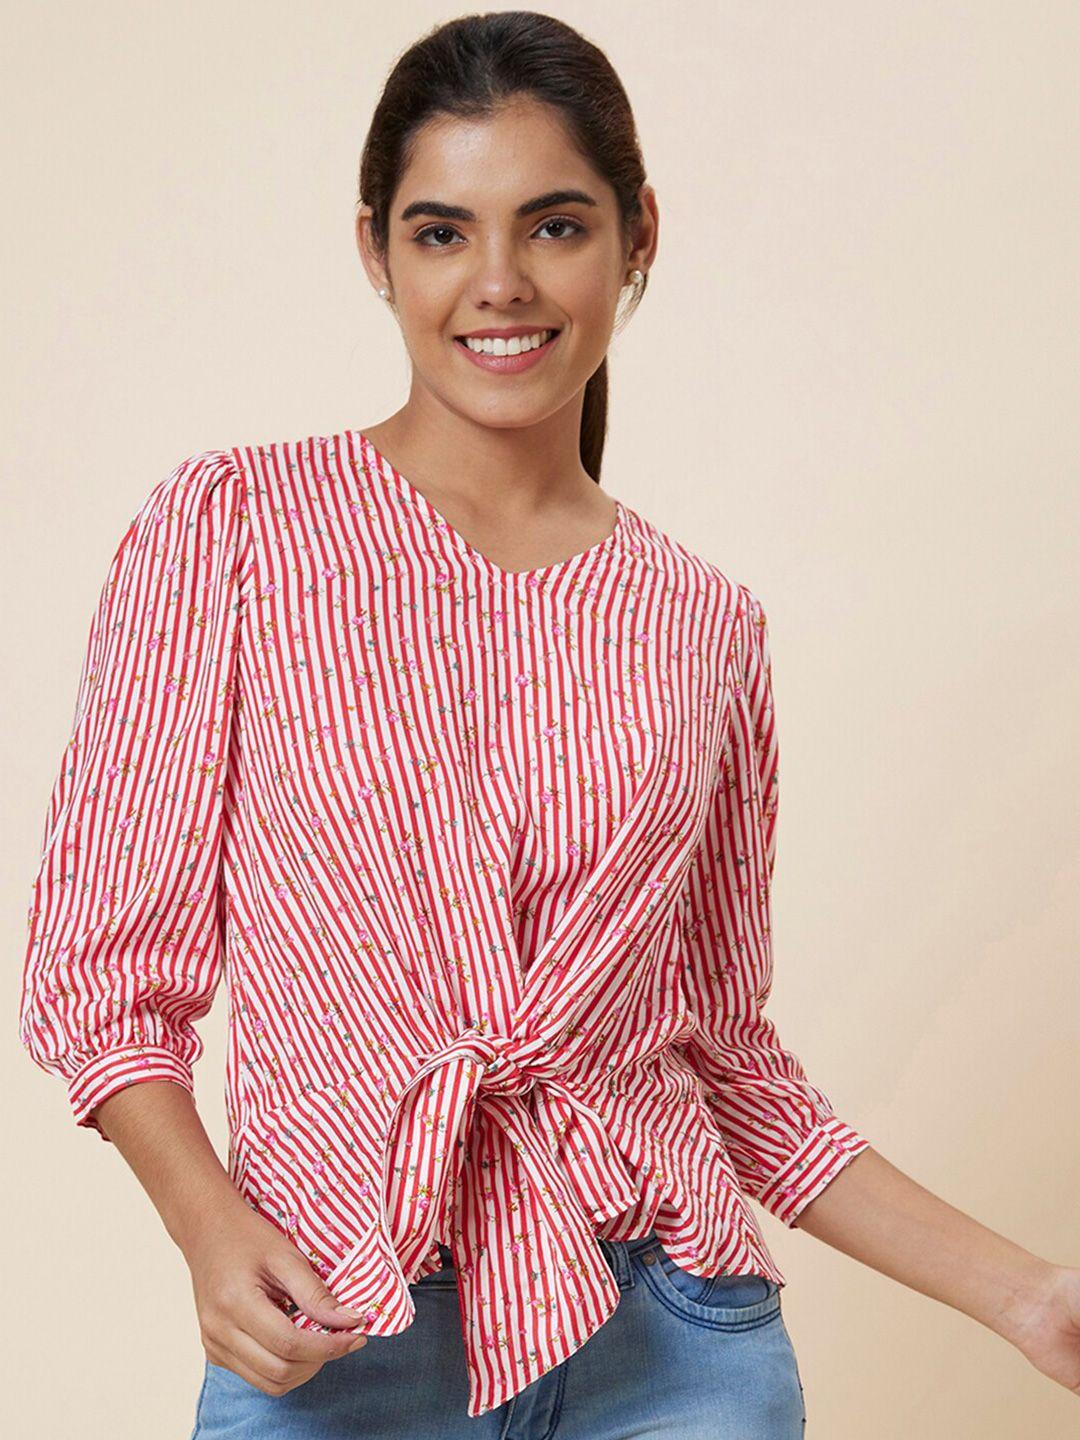 globus-red-&-white-striped-puff-sleeves-top